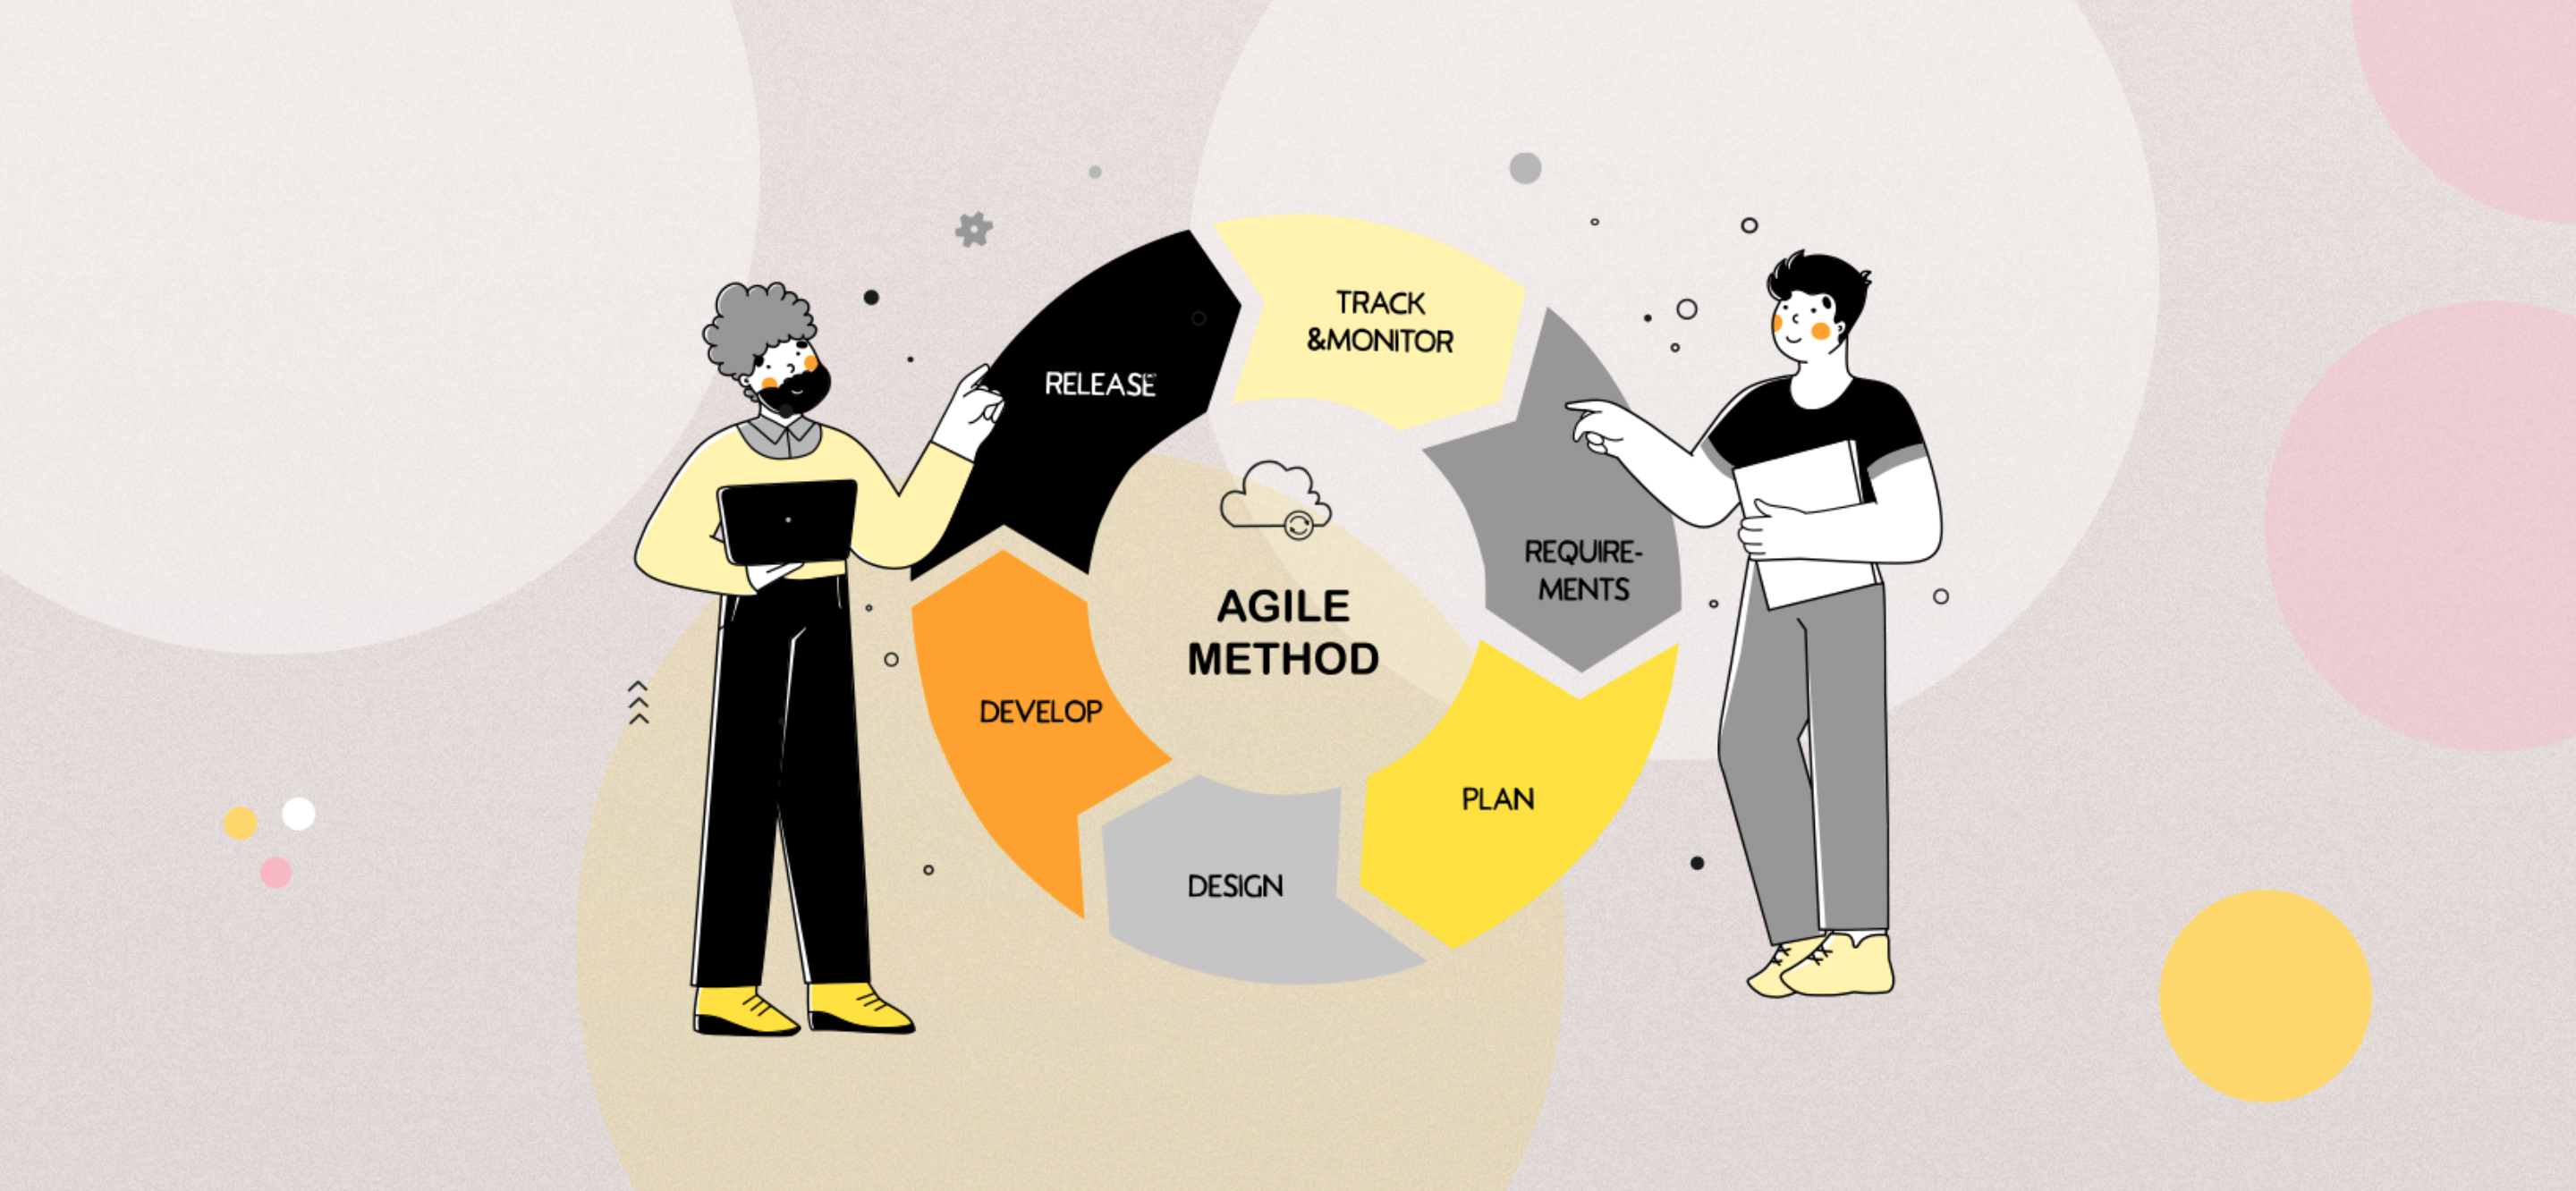 How does the Agile methodology work?